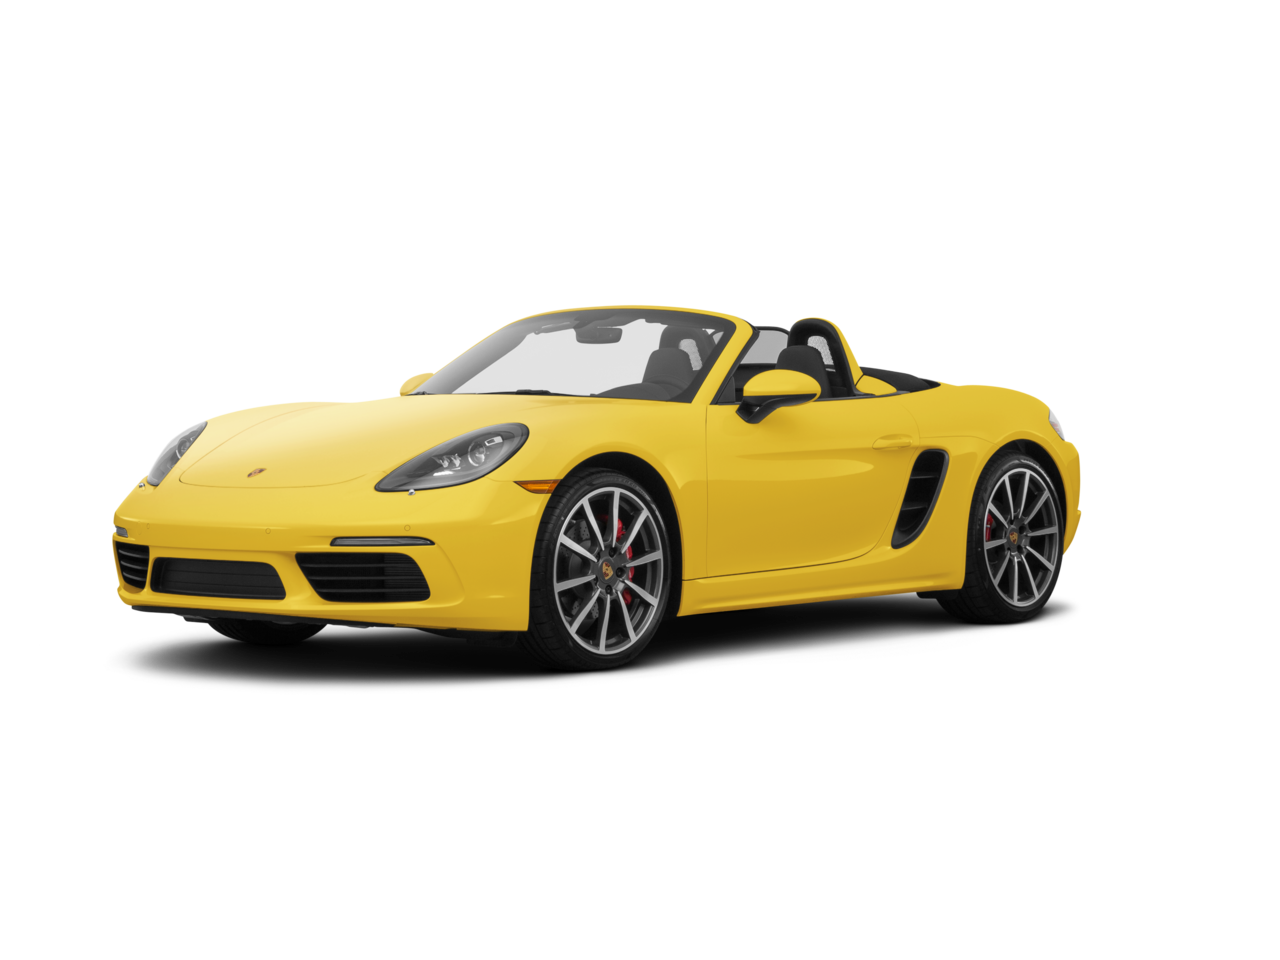 Porsche 718 Boxster Background PNG Image